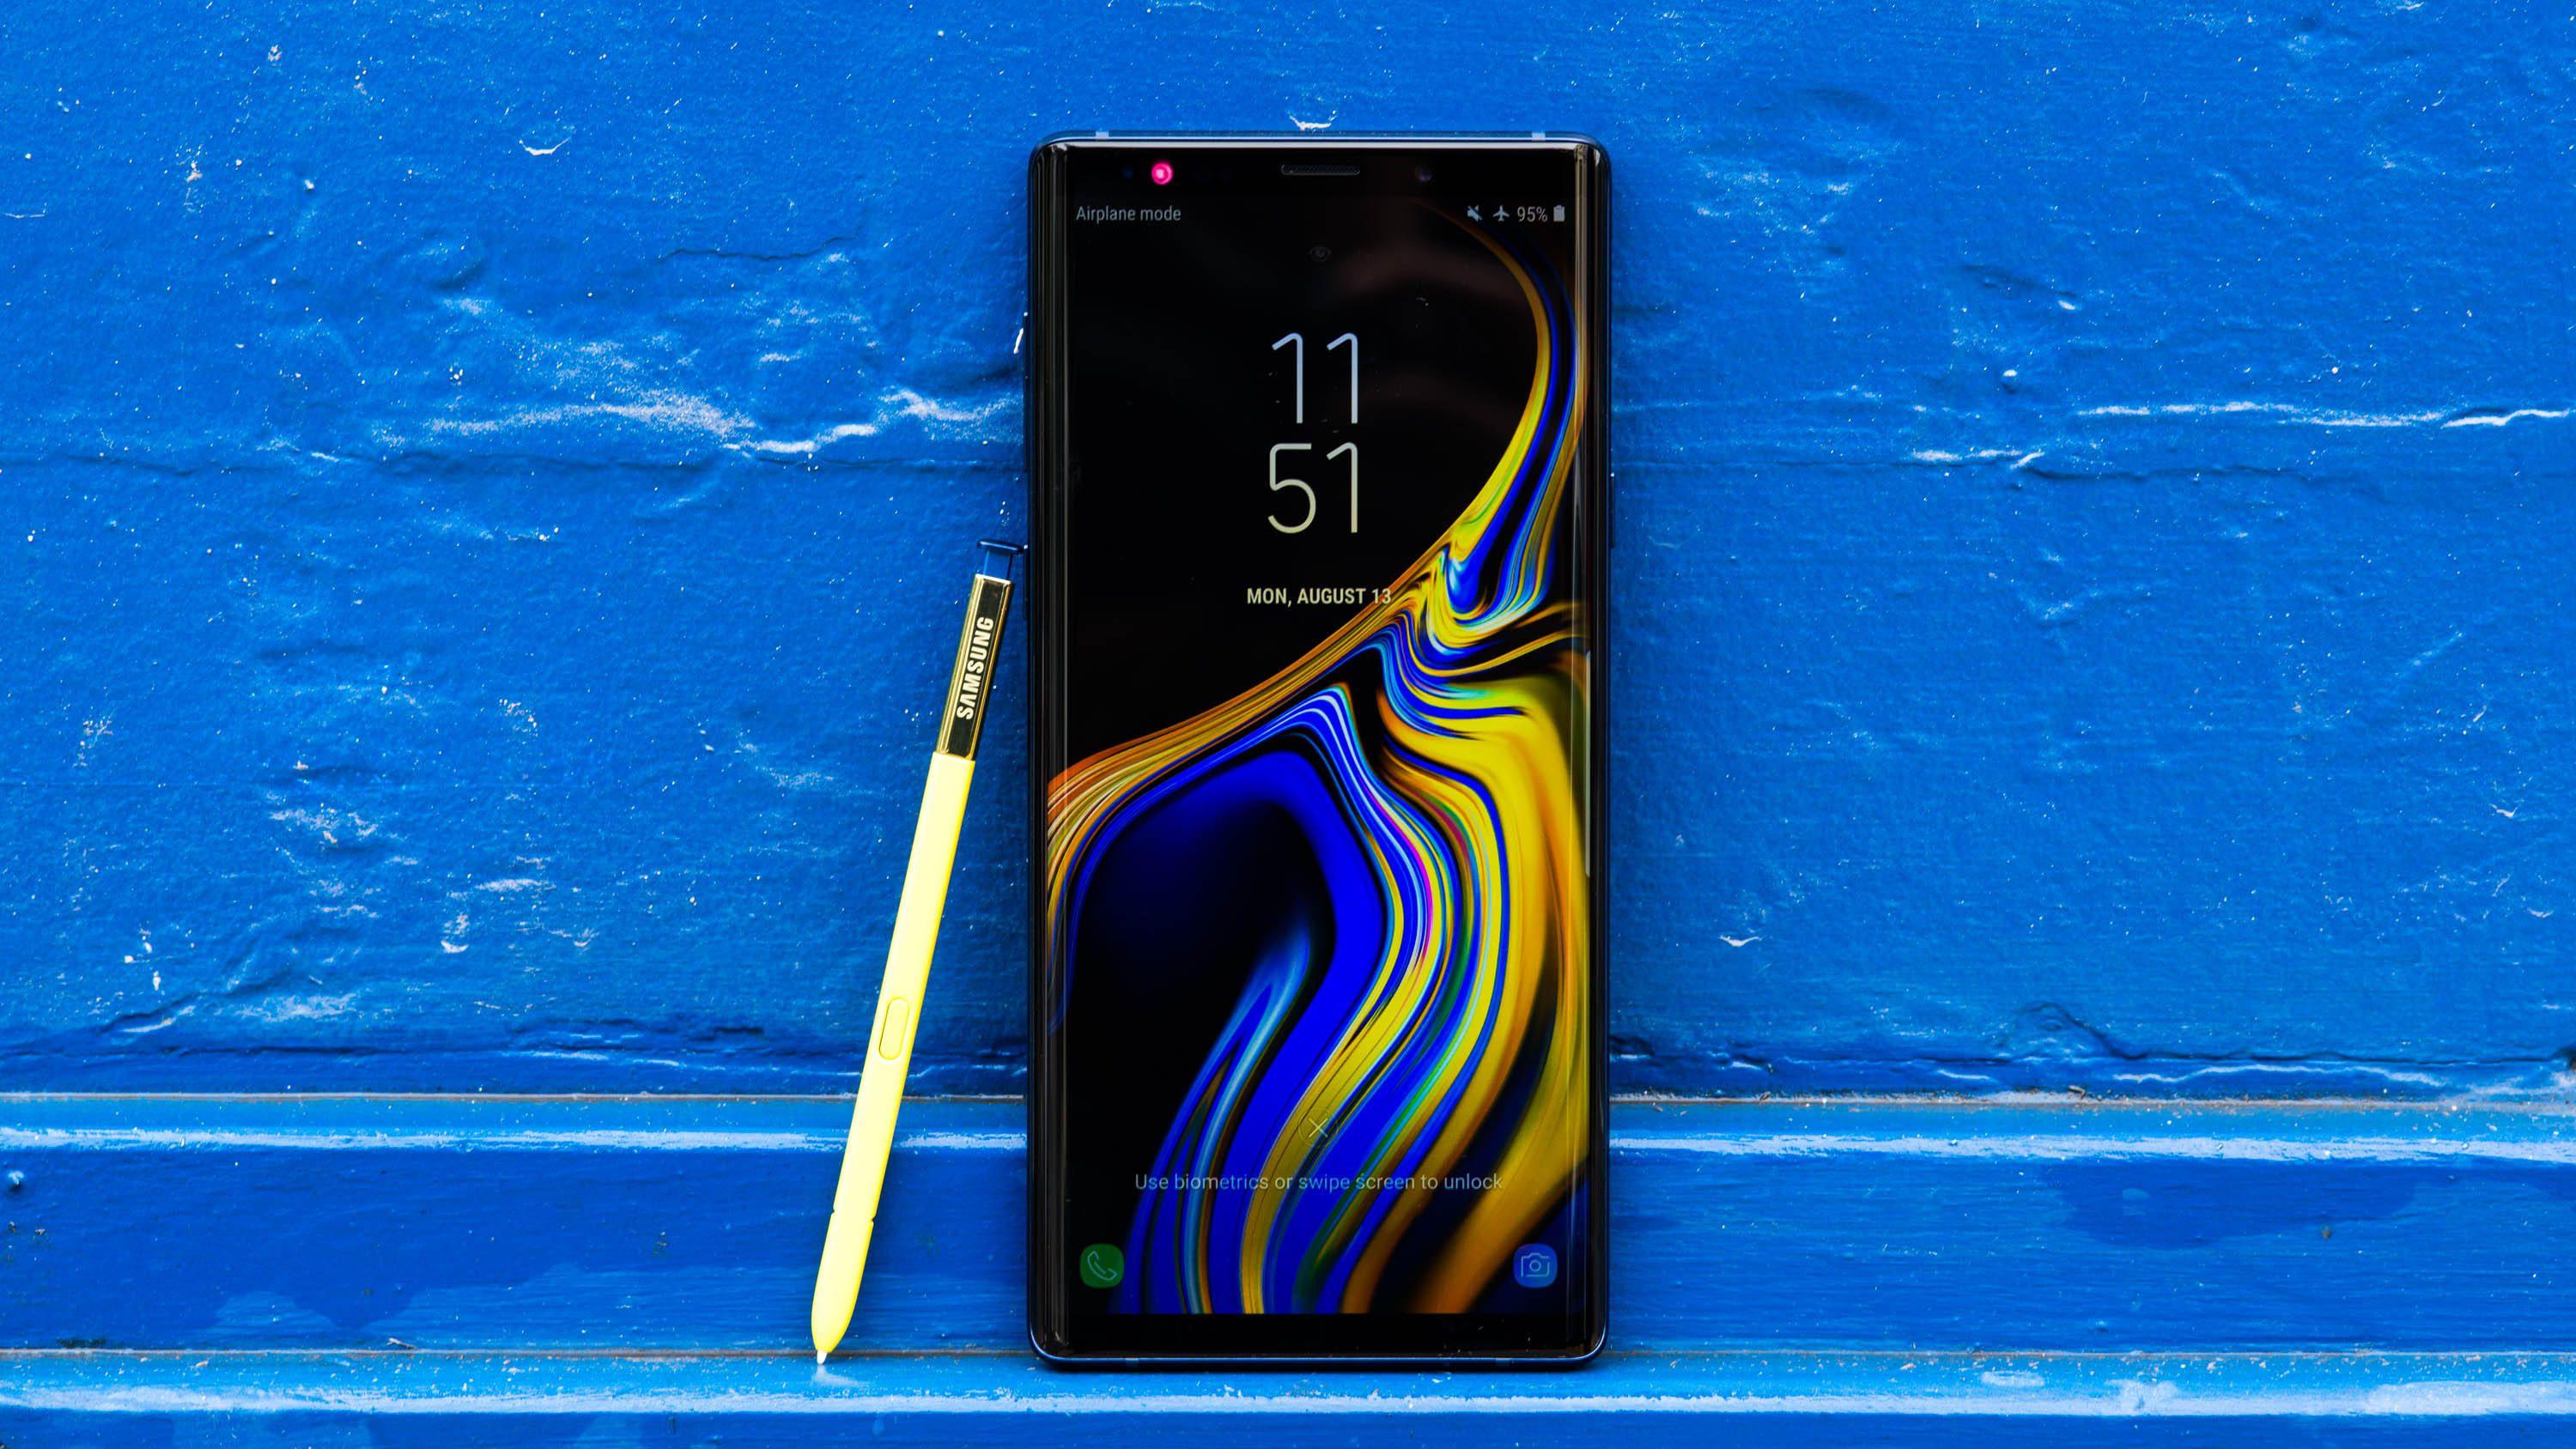 Samsung Galaxy Note 9 review: Note 9 could still reel you in after the Note 10 launch - CNET